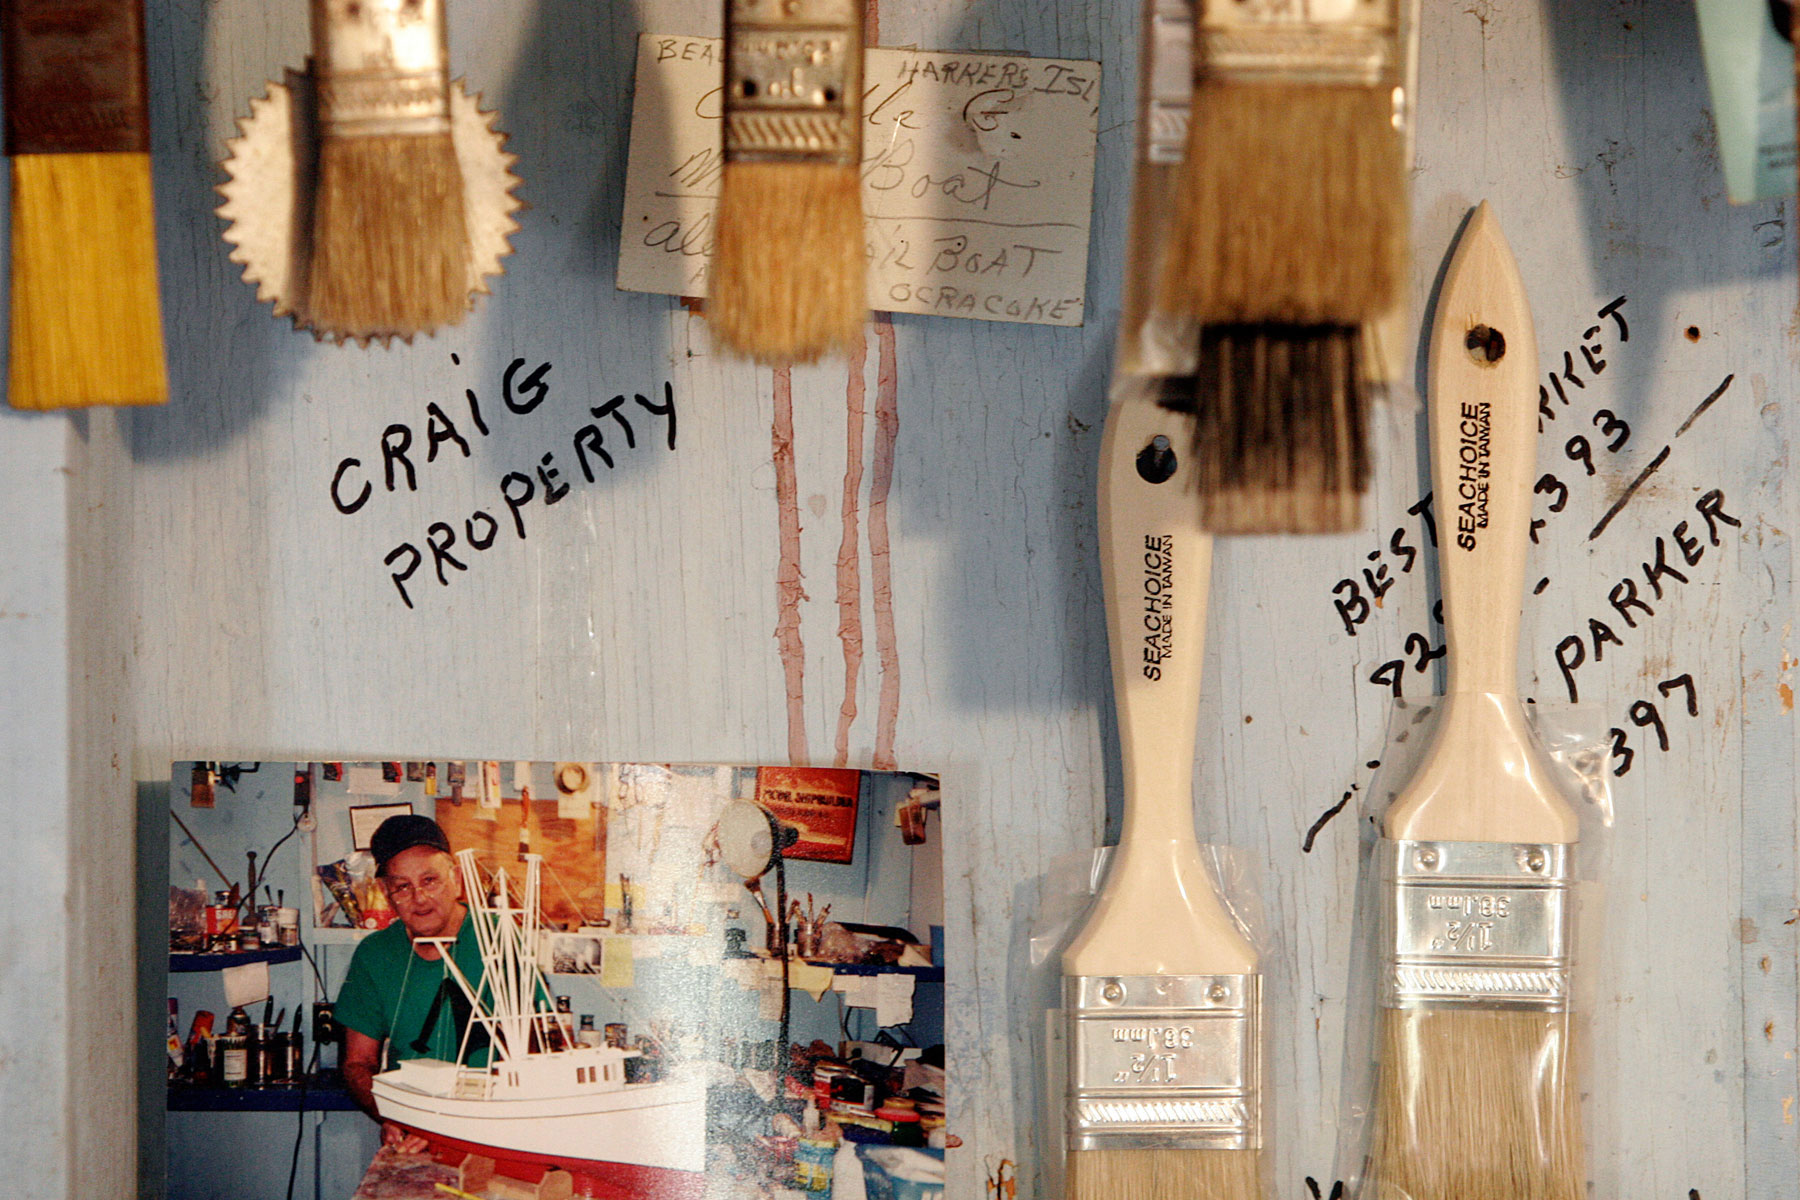 Painbrushes hanging on a weathered wall, along with a photograph of a man and a boat